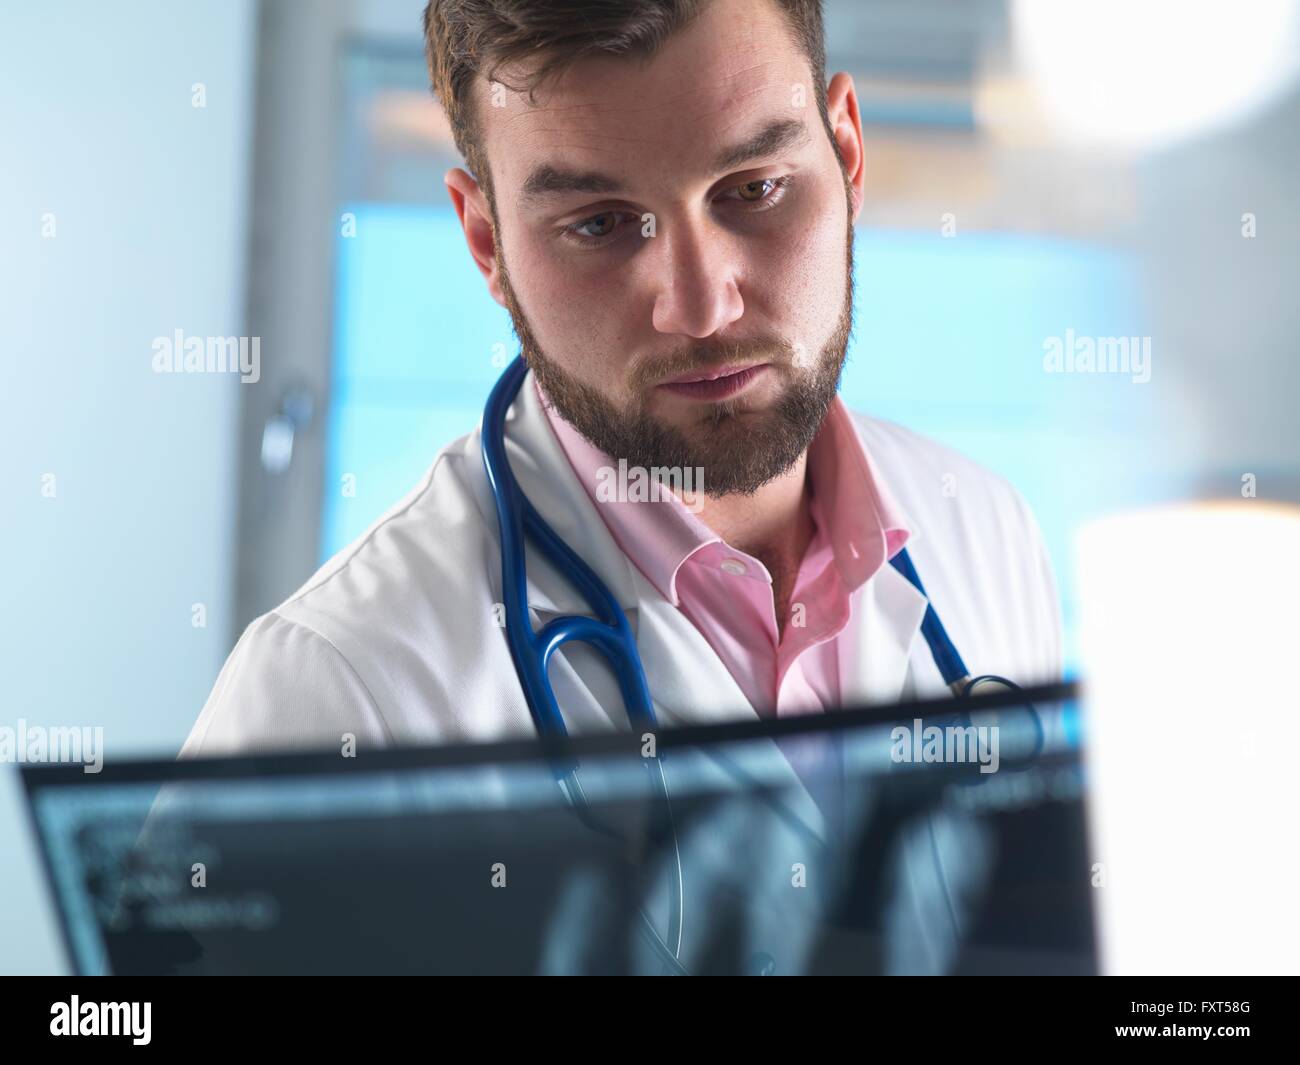 Junior doctor examining x-ray of fractured hand in hospital Stock Photo